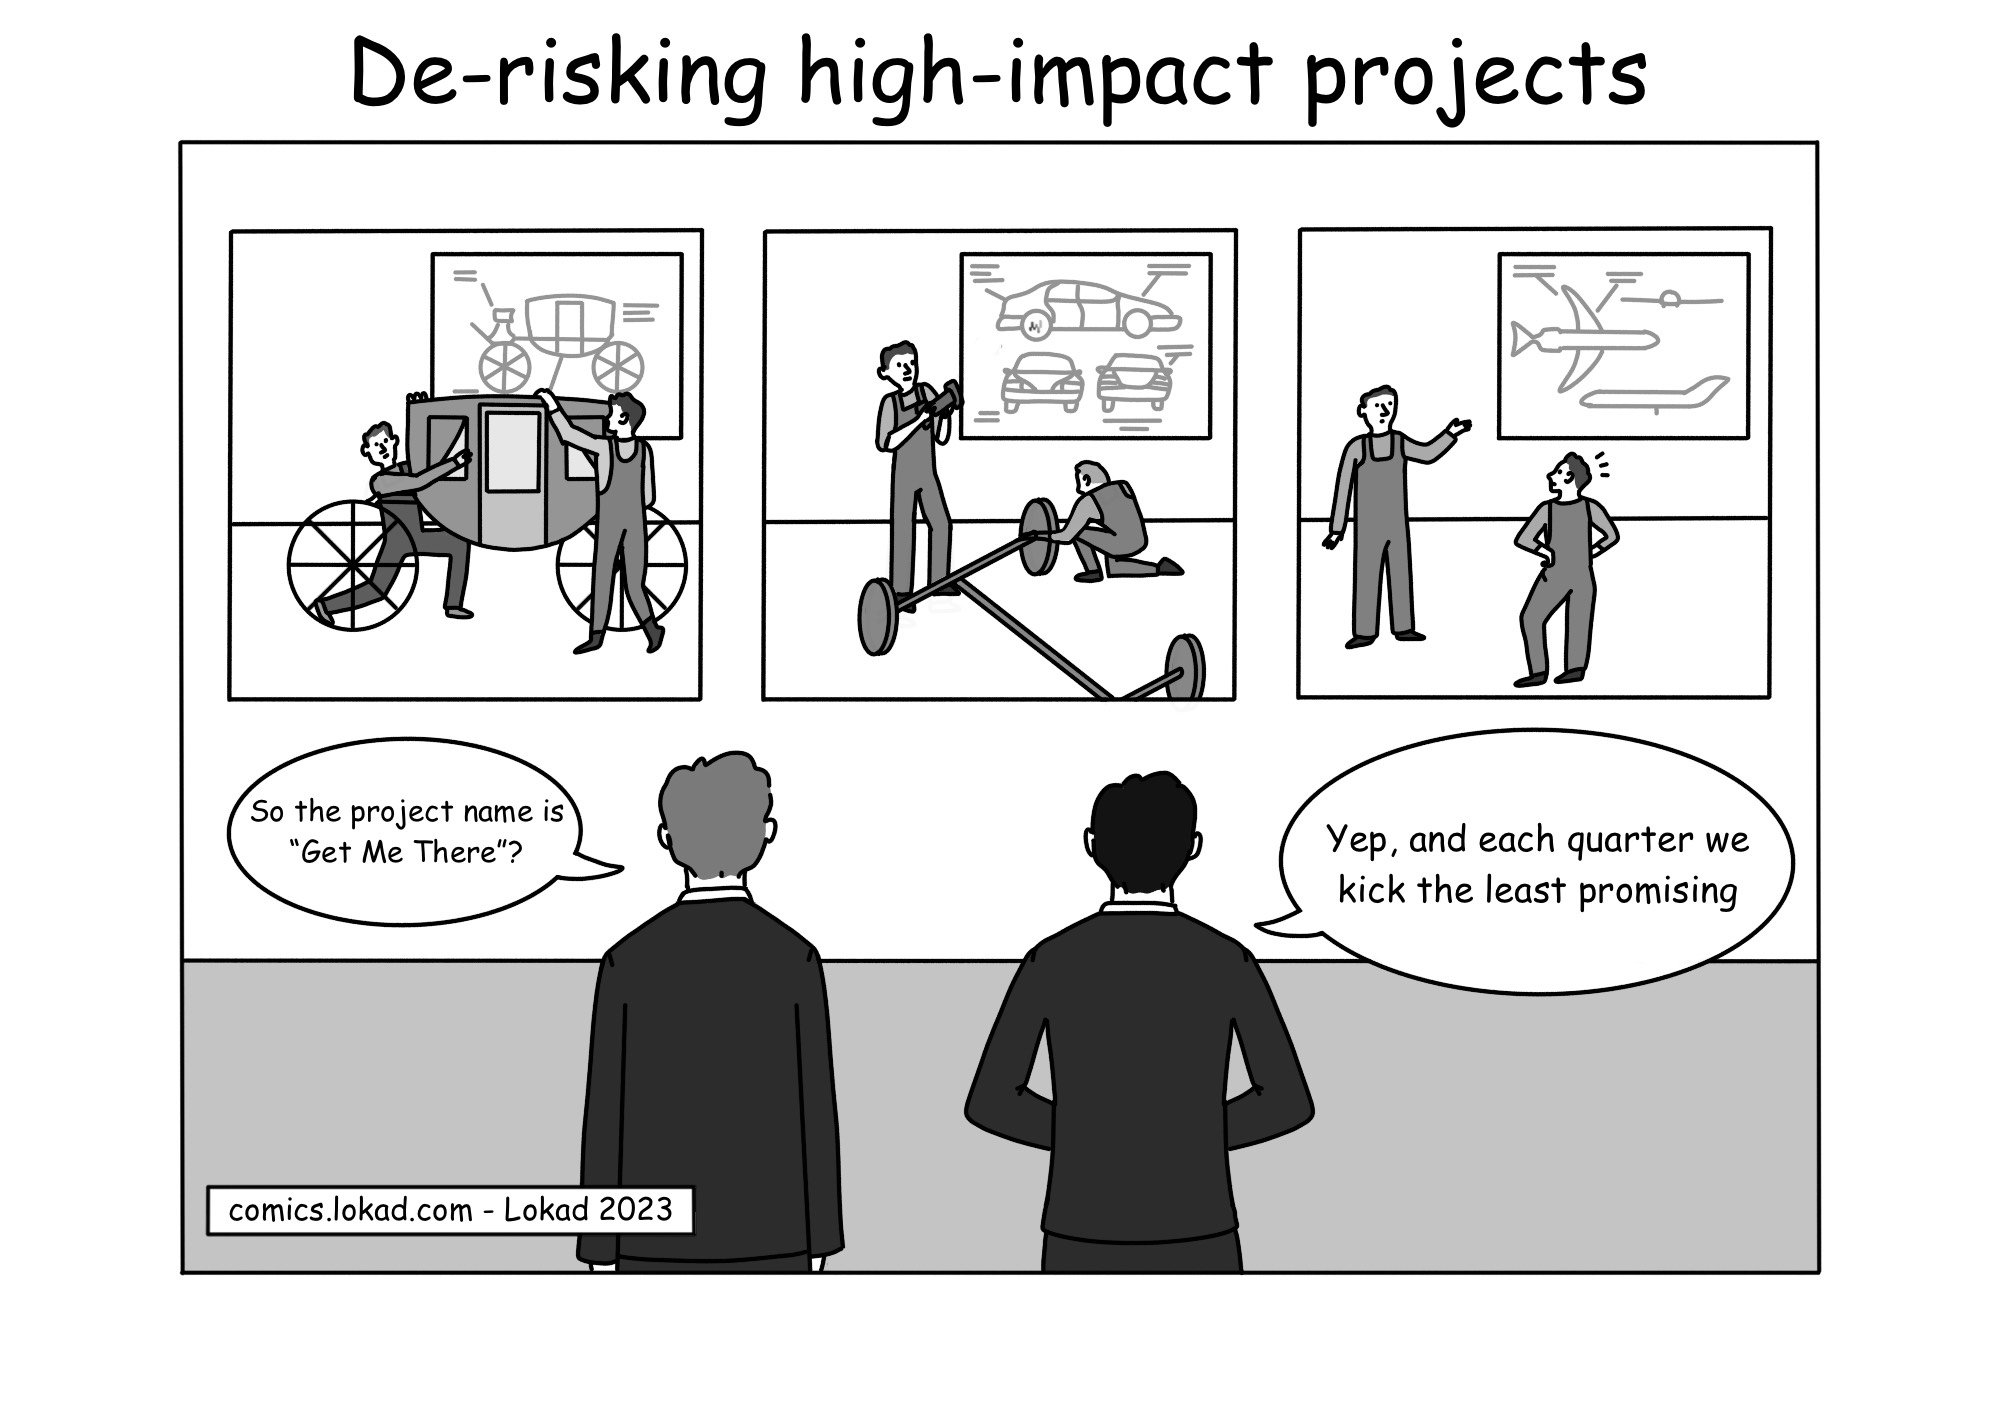 De-risking high-impact projects